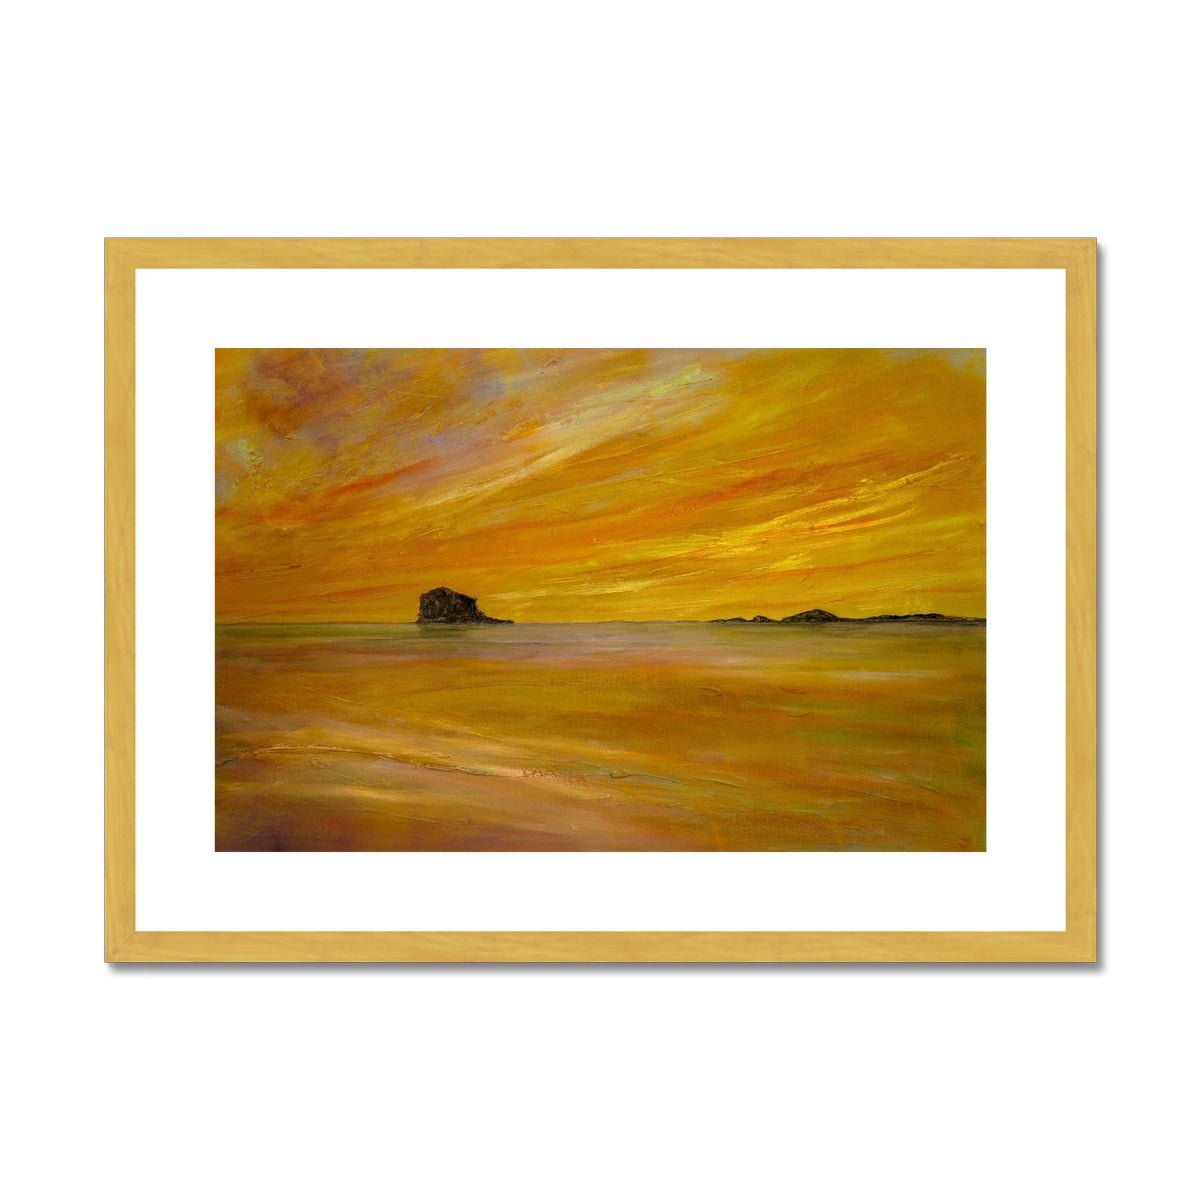 Bass Rock Dusk Painting | Antique Framed & Mounted Prints From Scotland-Antique Framed & Mounted Prints-Edinburgh & Glasgow Art Gallery-A2 Landscape-Gold Frame-Paintings, Prints, Homeware, Art Gifts From Scotland By Scottish Artist Kevin Hunter